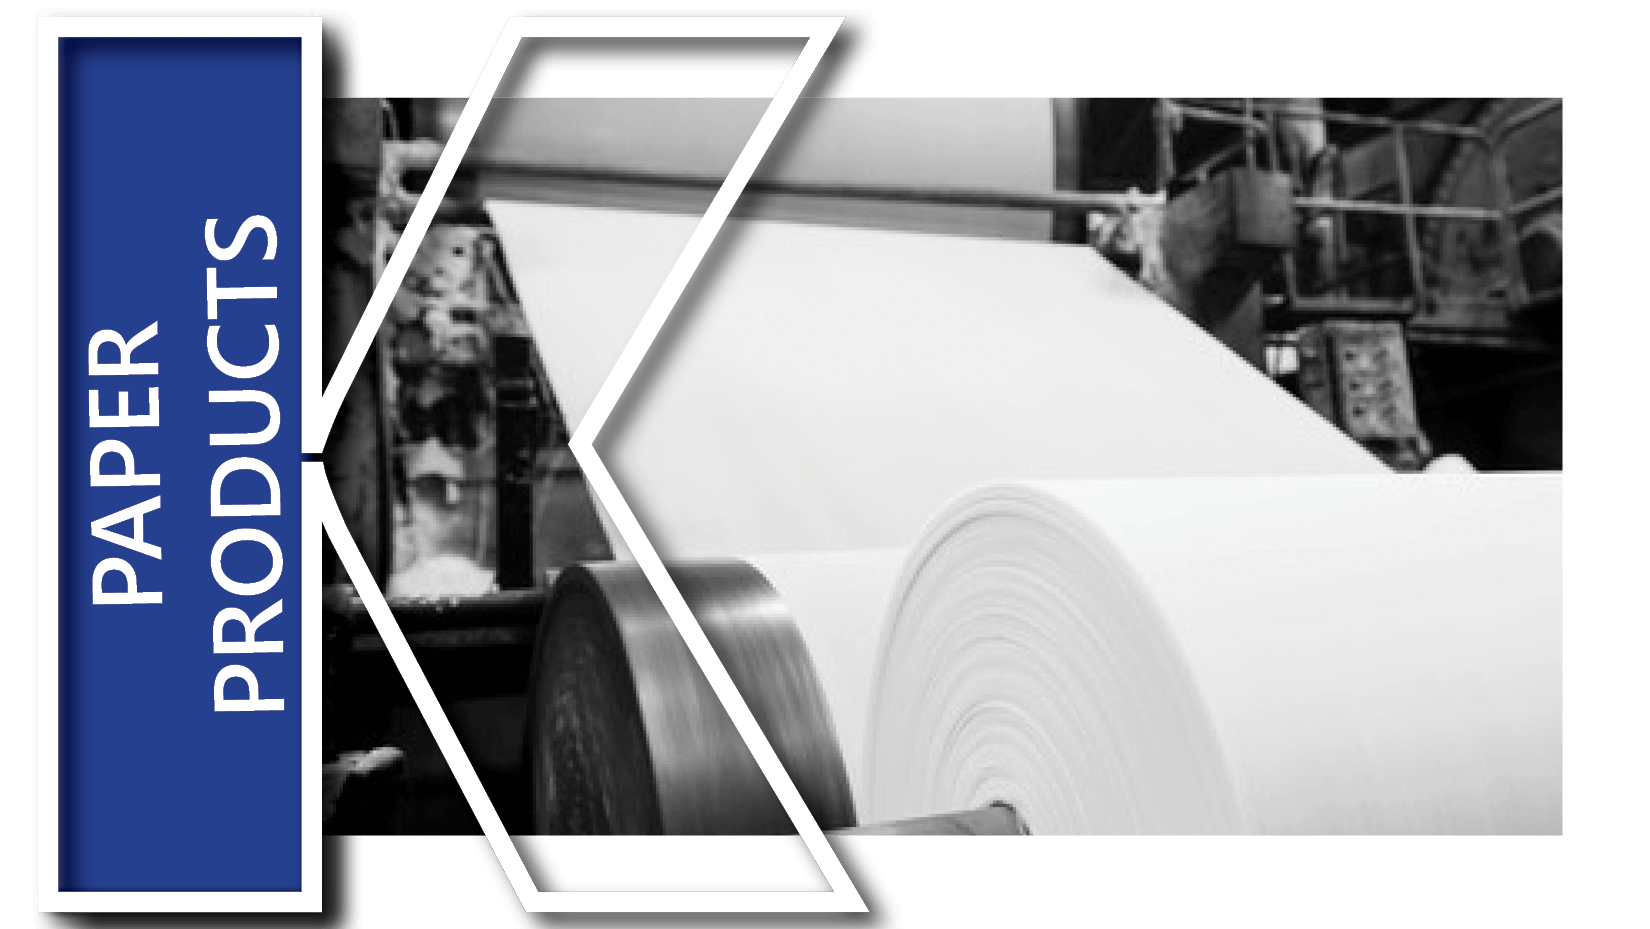 Large paper roll on a machine with large K graphic to the left and Paper Products in text 